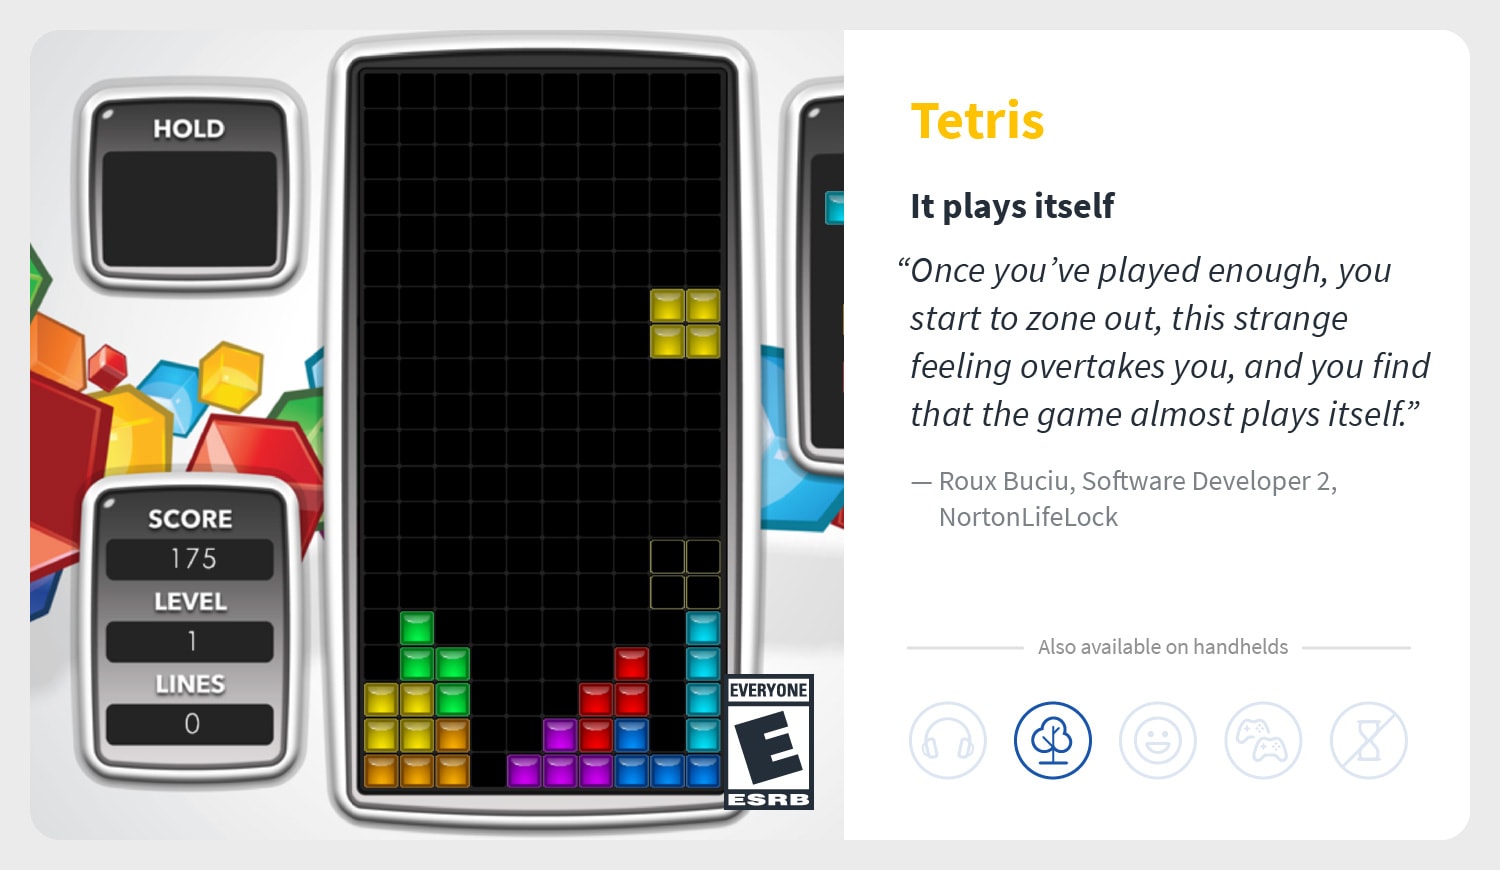 a screenshot of the video game Tetris and a testament to it being a relaxing games